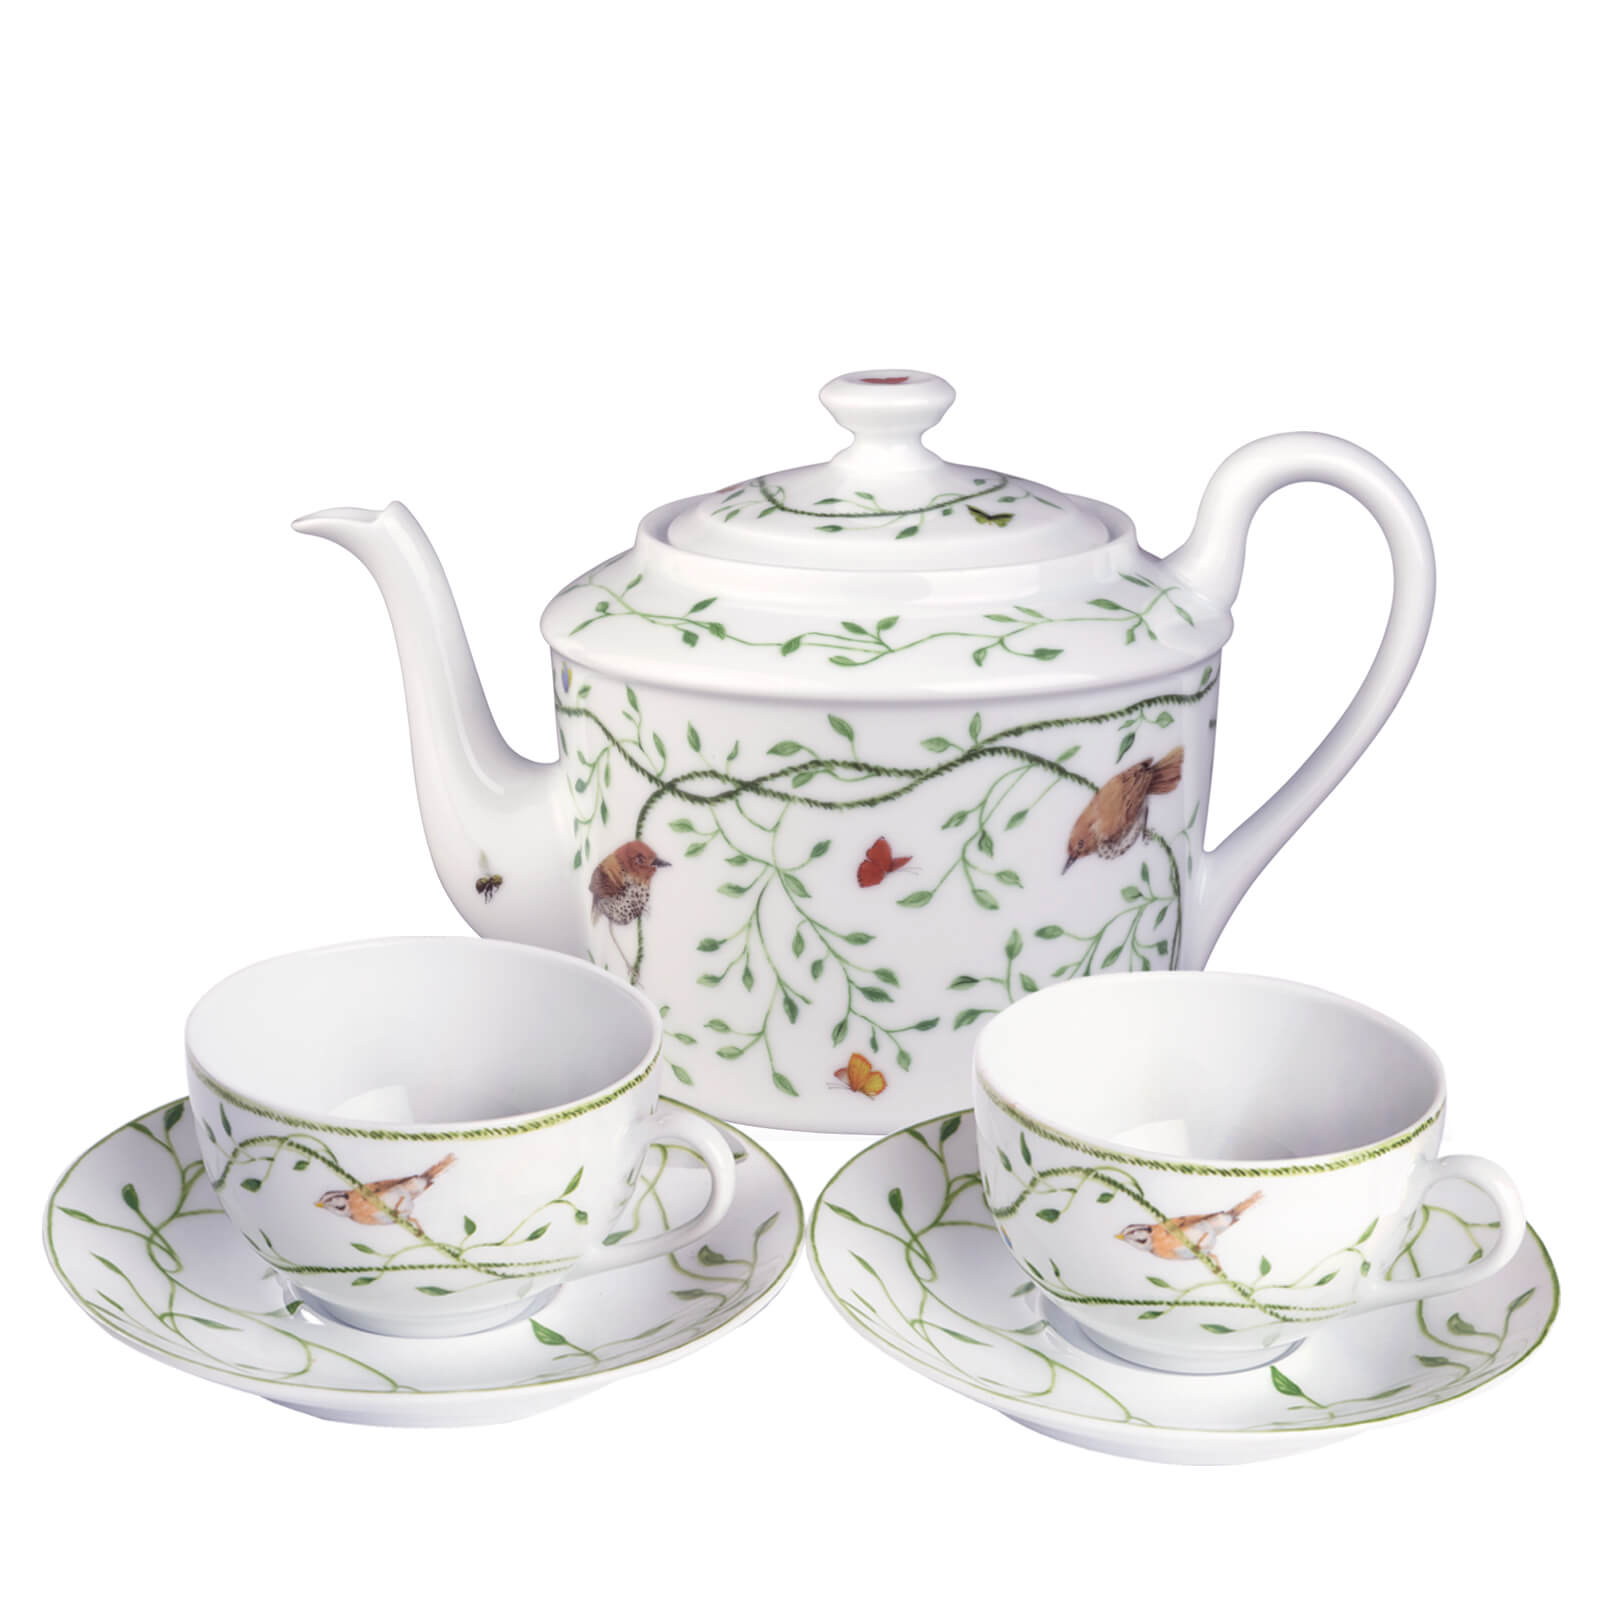 Le Bristol Paris Raynaud Set of Two Tea Cups, Saucers & Teapot - Oetker Collection Hotels Boutique